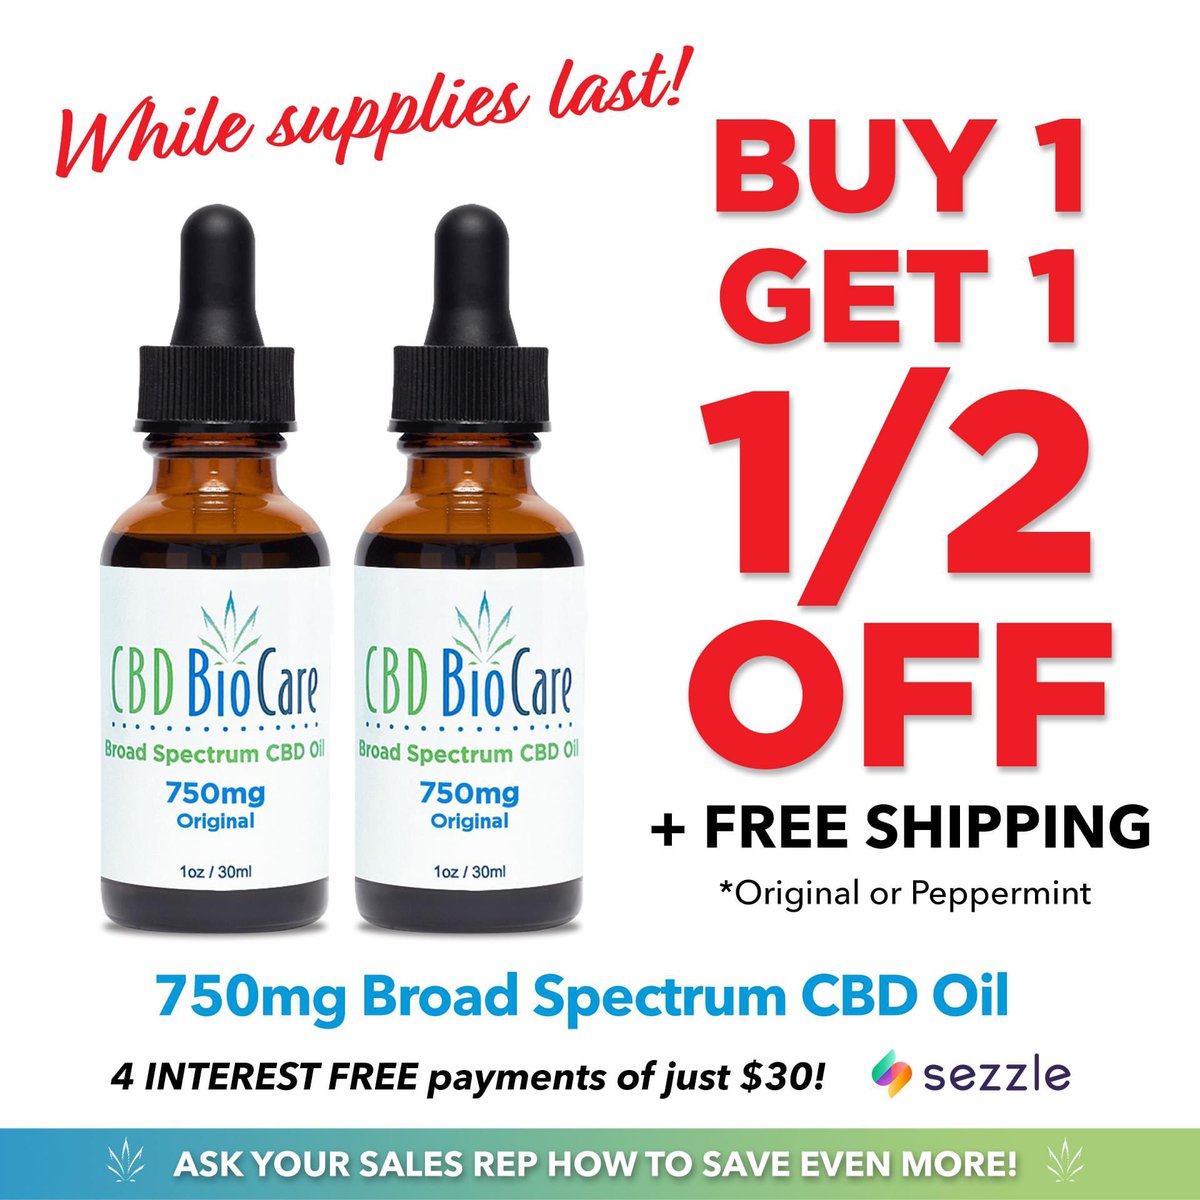 This weekend only!!!

tinyurl.com/yazt8t7r

Save another 5% with coupon code: novo

Great for pets too!!!

#BOGO #sale #salesalesale #weekendsale #anxiety #AnxietyRelief #StressRelief #stress #pain #painrelief